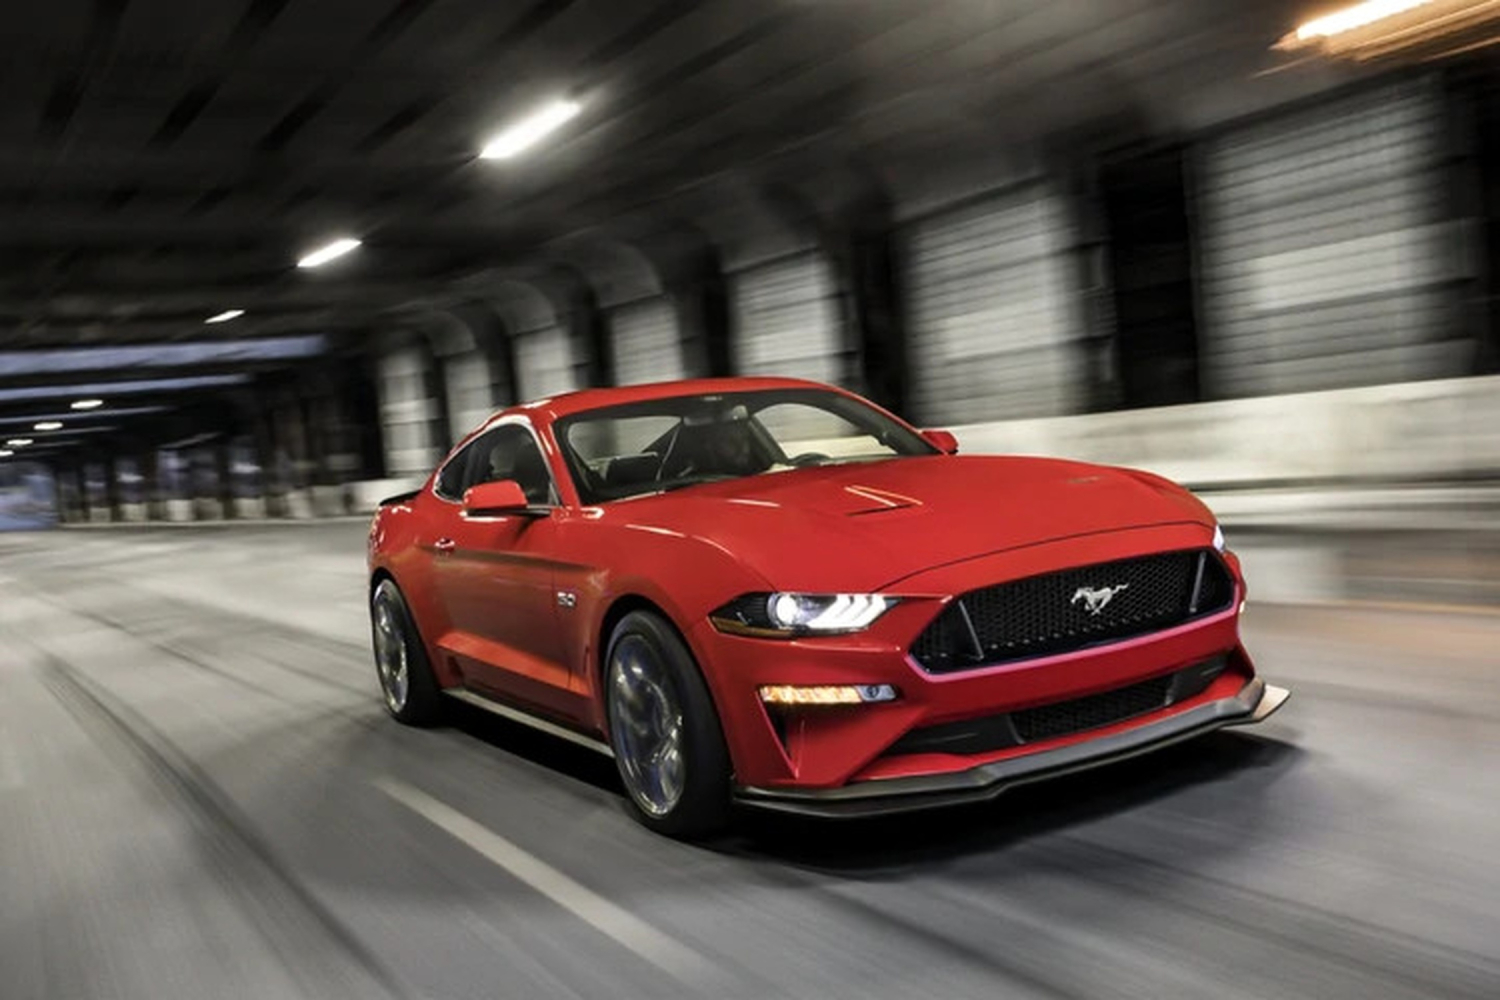 A red Ford Mustang GT topped a study by the American University